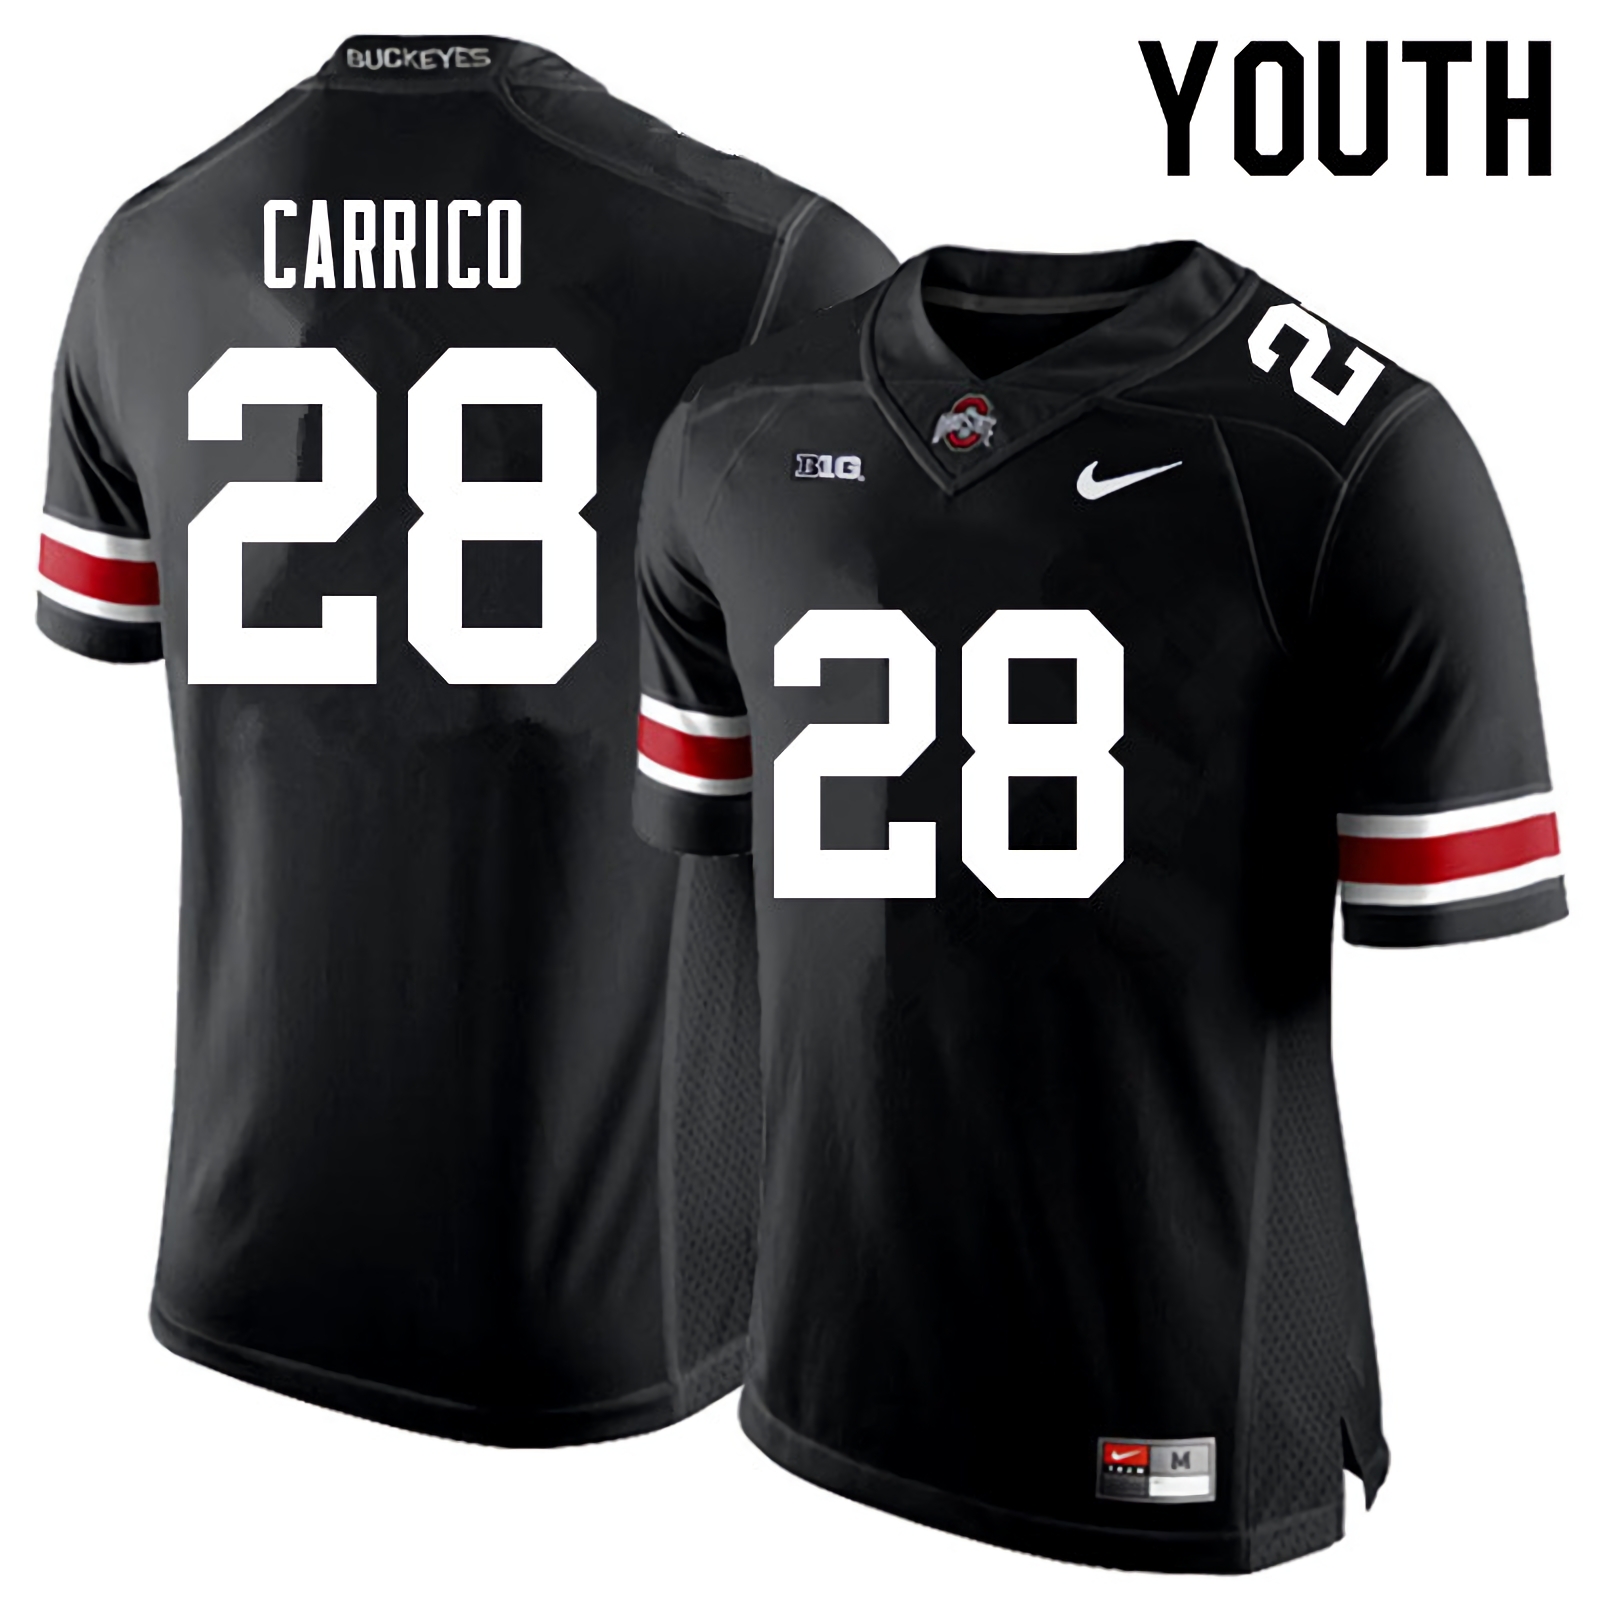 Reid Carrico Ohio State Buckeyes Youth NCAA #28 Black White Number College Stitched Football Jersey VCD5556BW